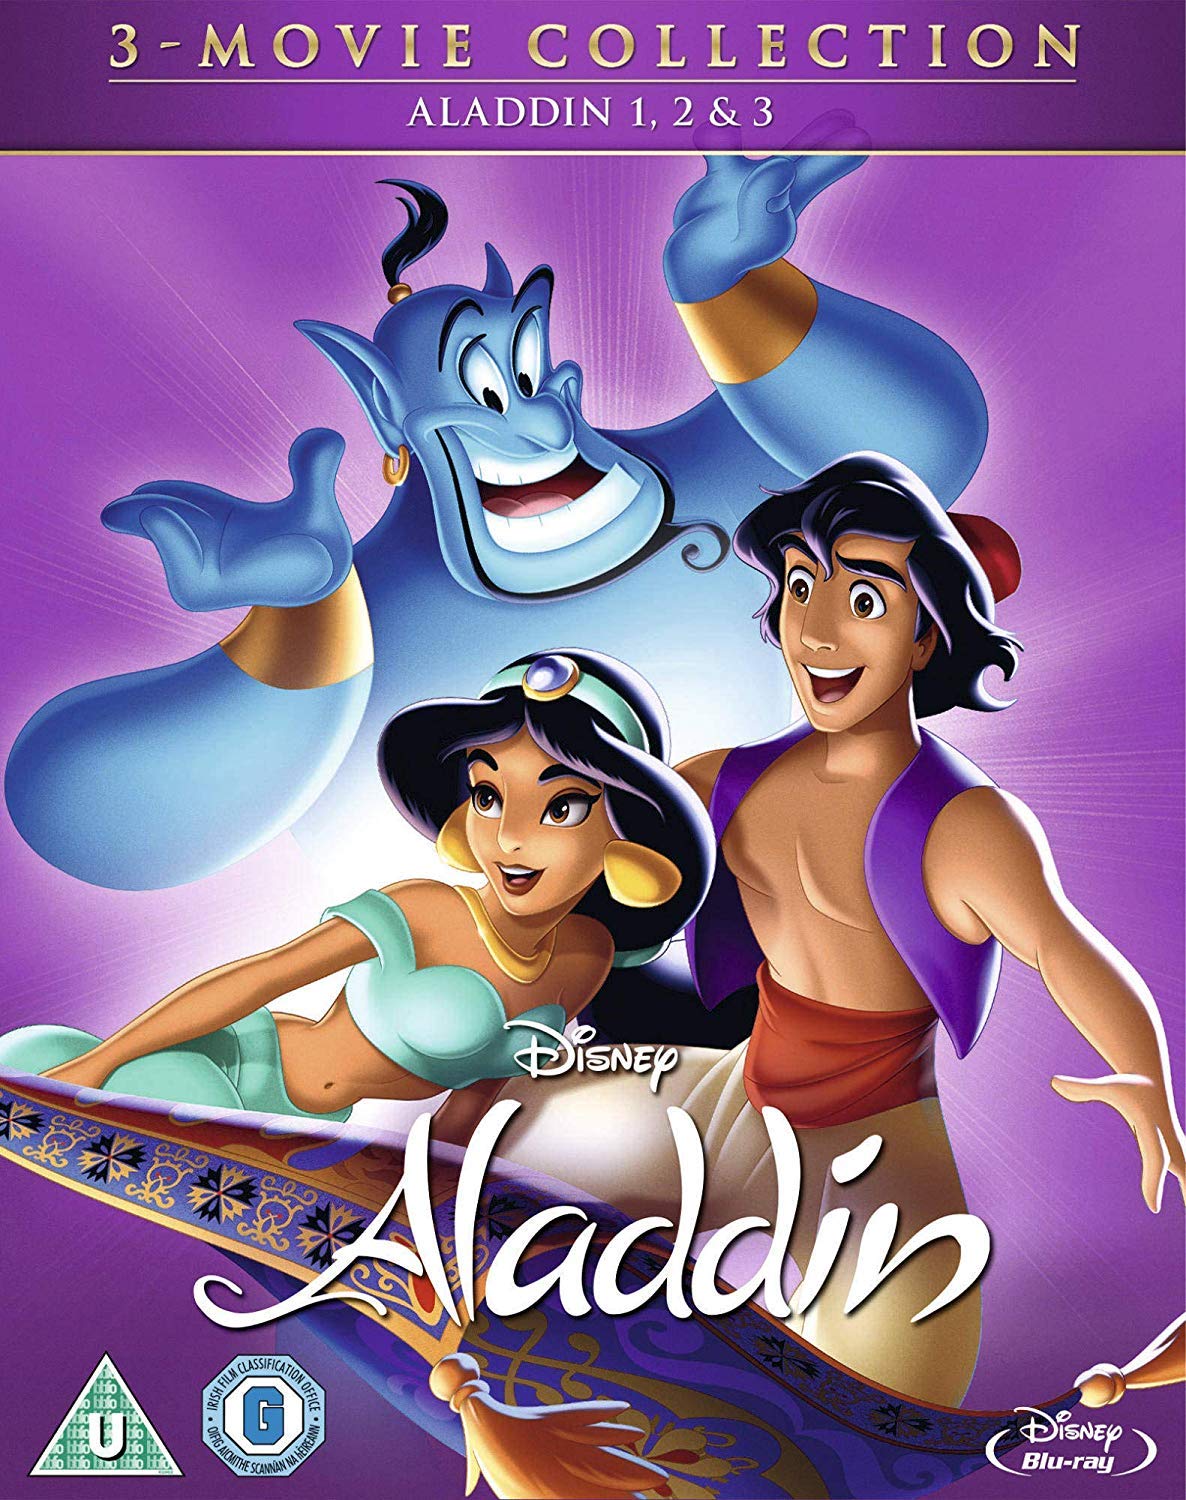 Tom Cruise Was The Inspiration For Disney's 'Aladdin' - Simplemost